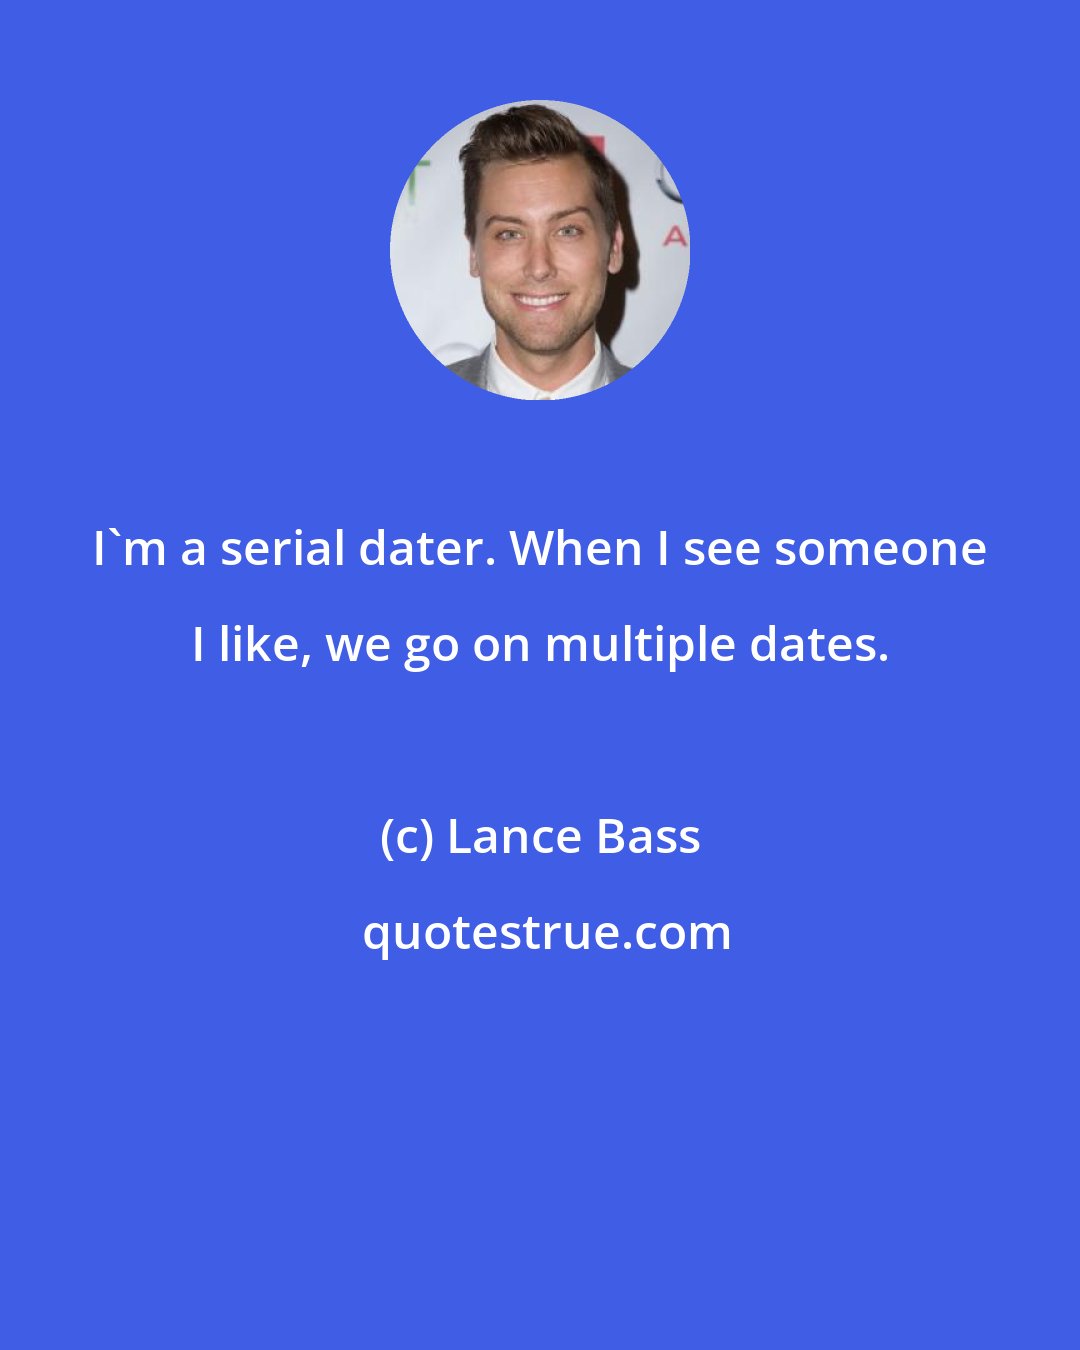 Lance Bass: I'm a serial dater. When I see someone I like, we go on multiple dates.